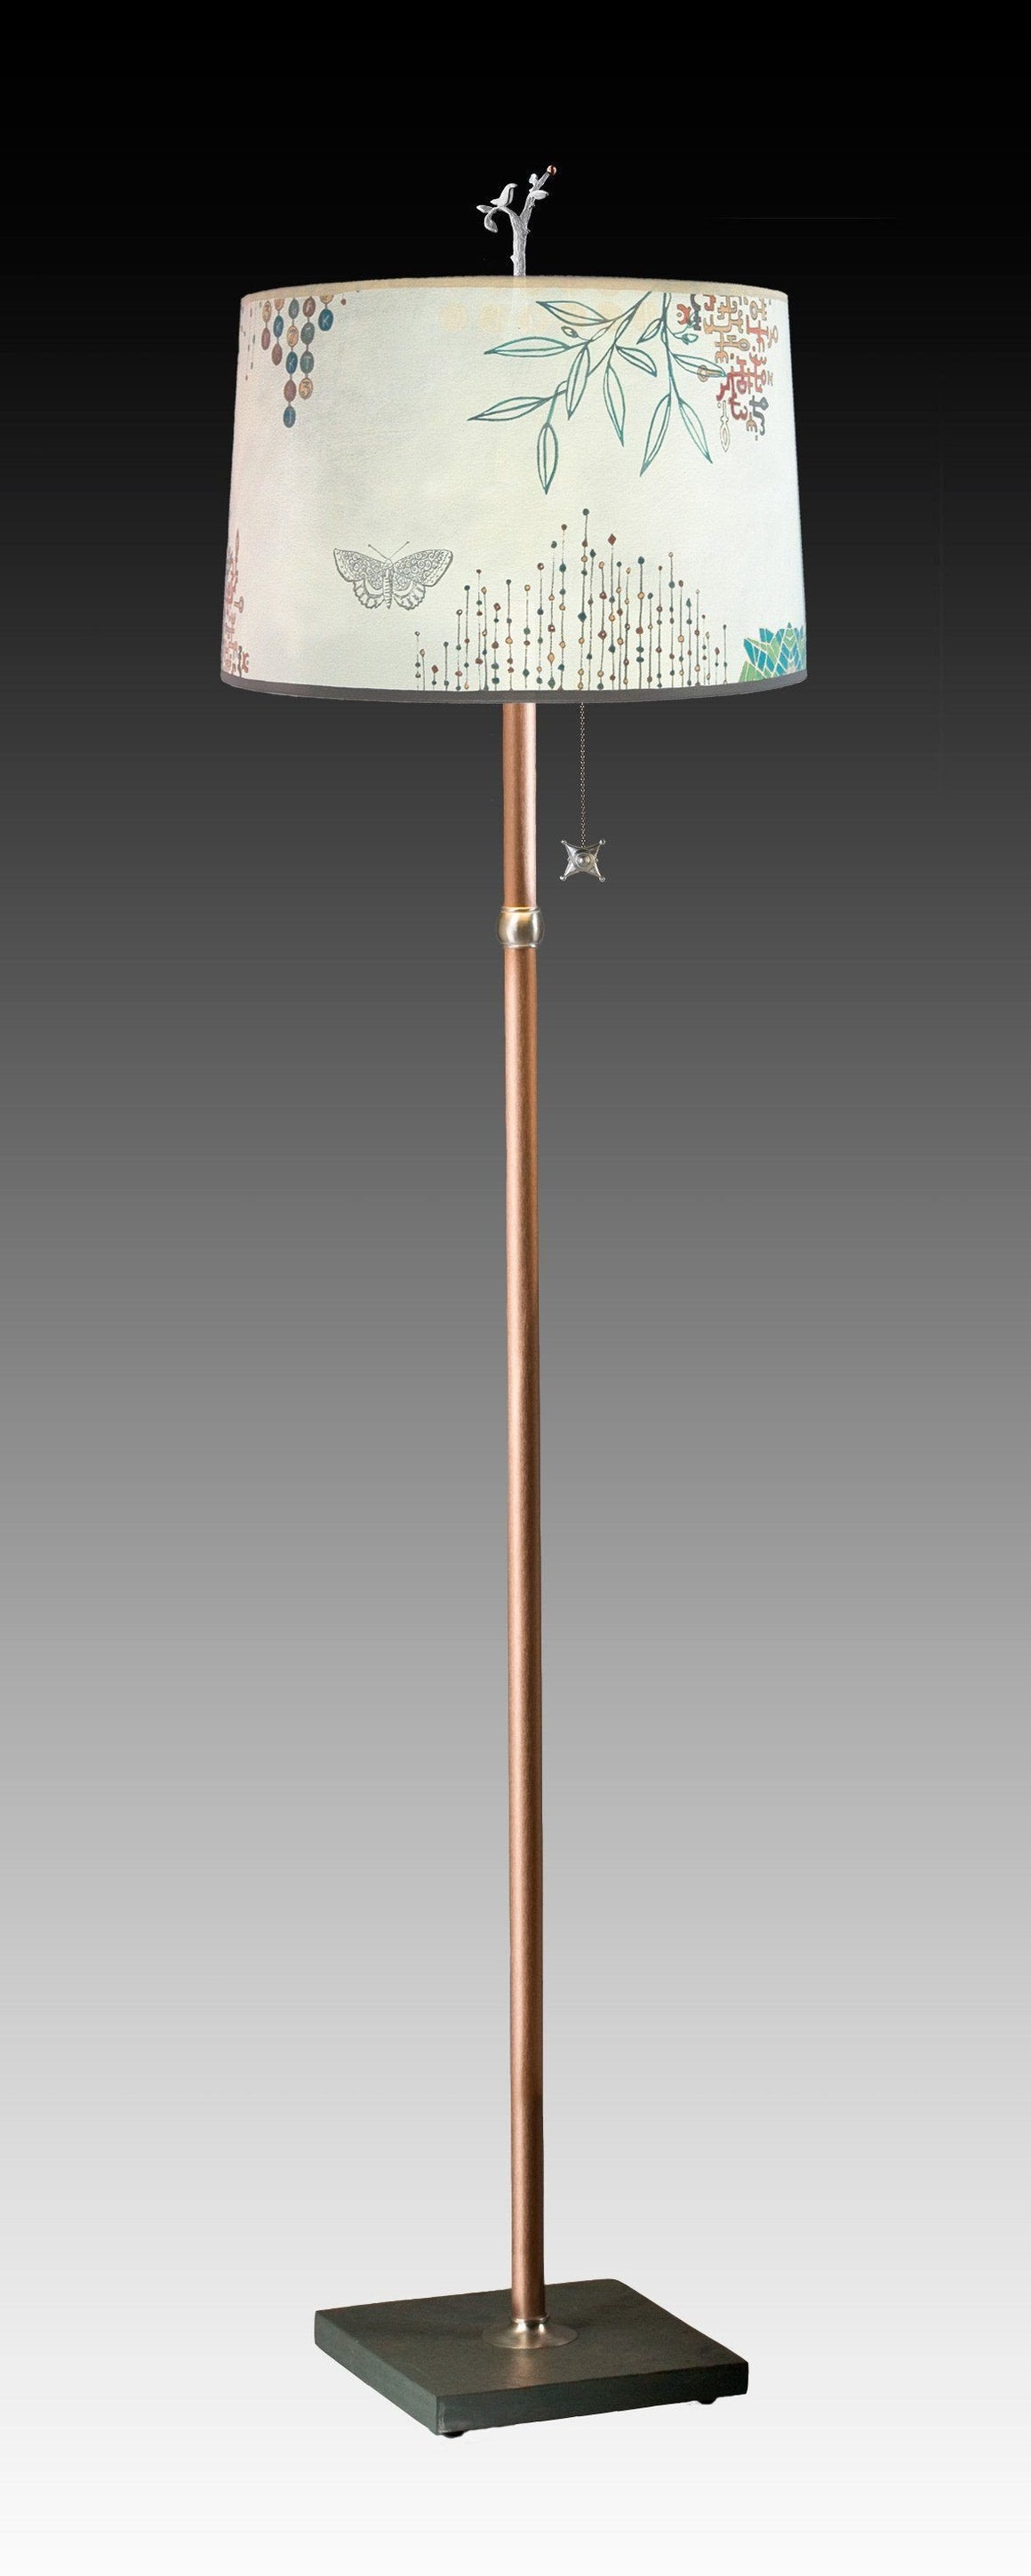 Copper Floor Lamp with Large Drum Shade in Ecru Journey